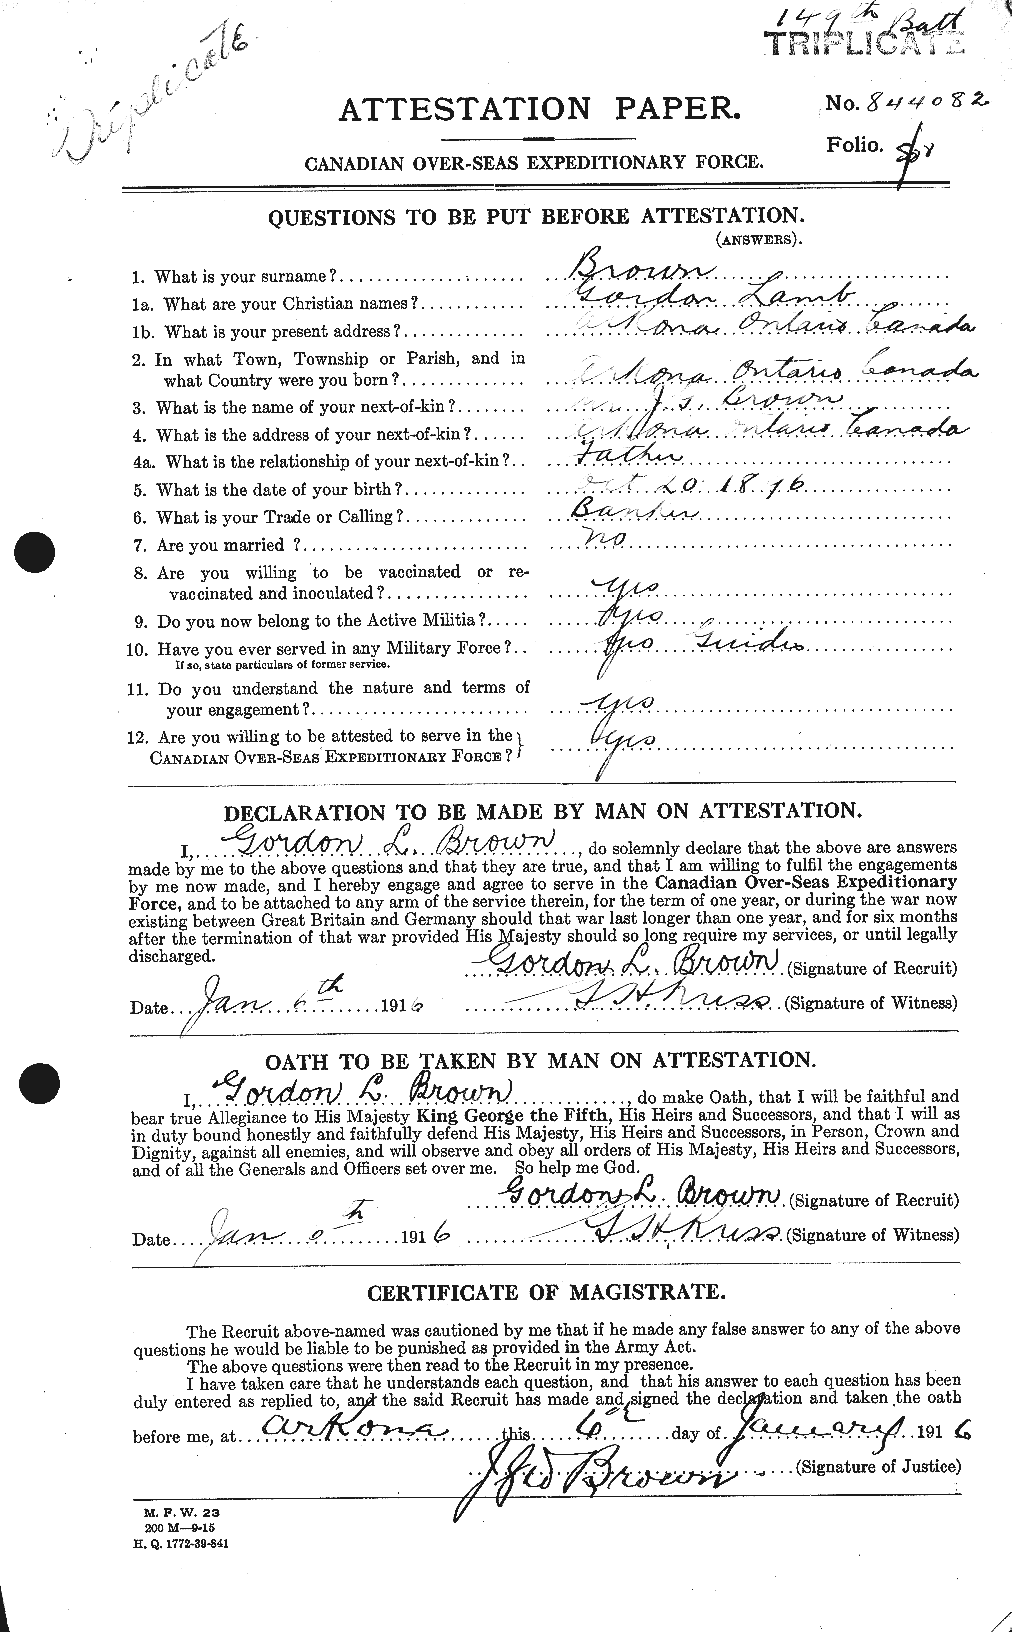 Personnel Records of the First World War - CEF 262639a